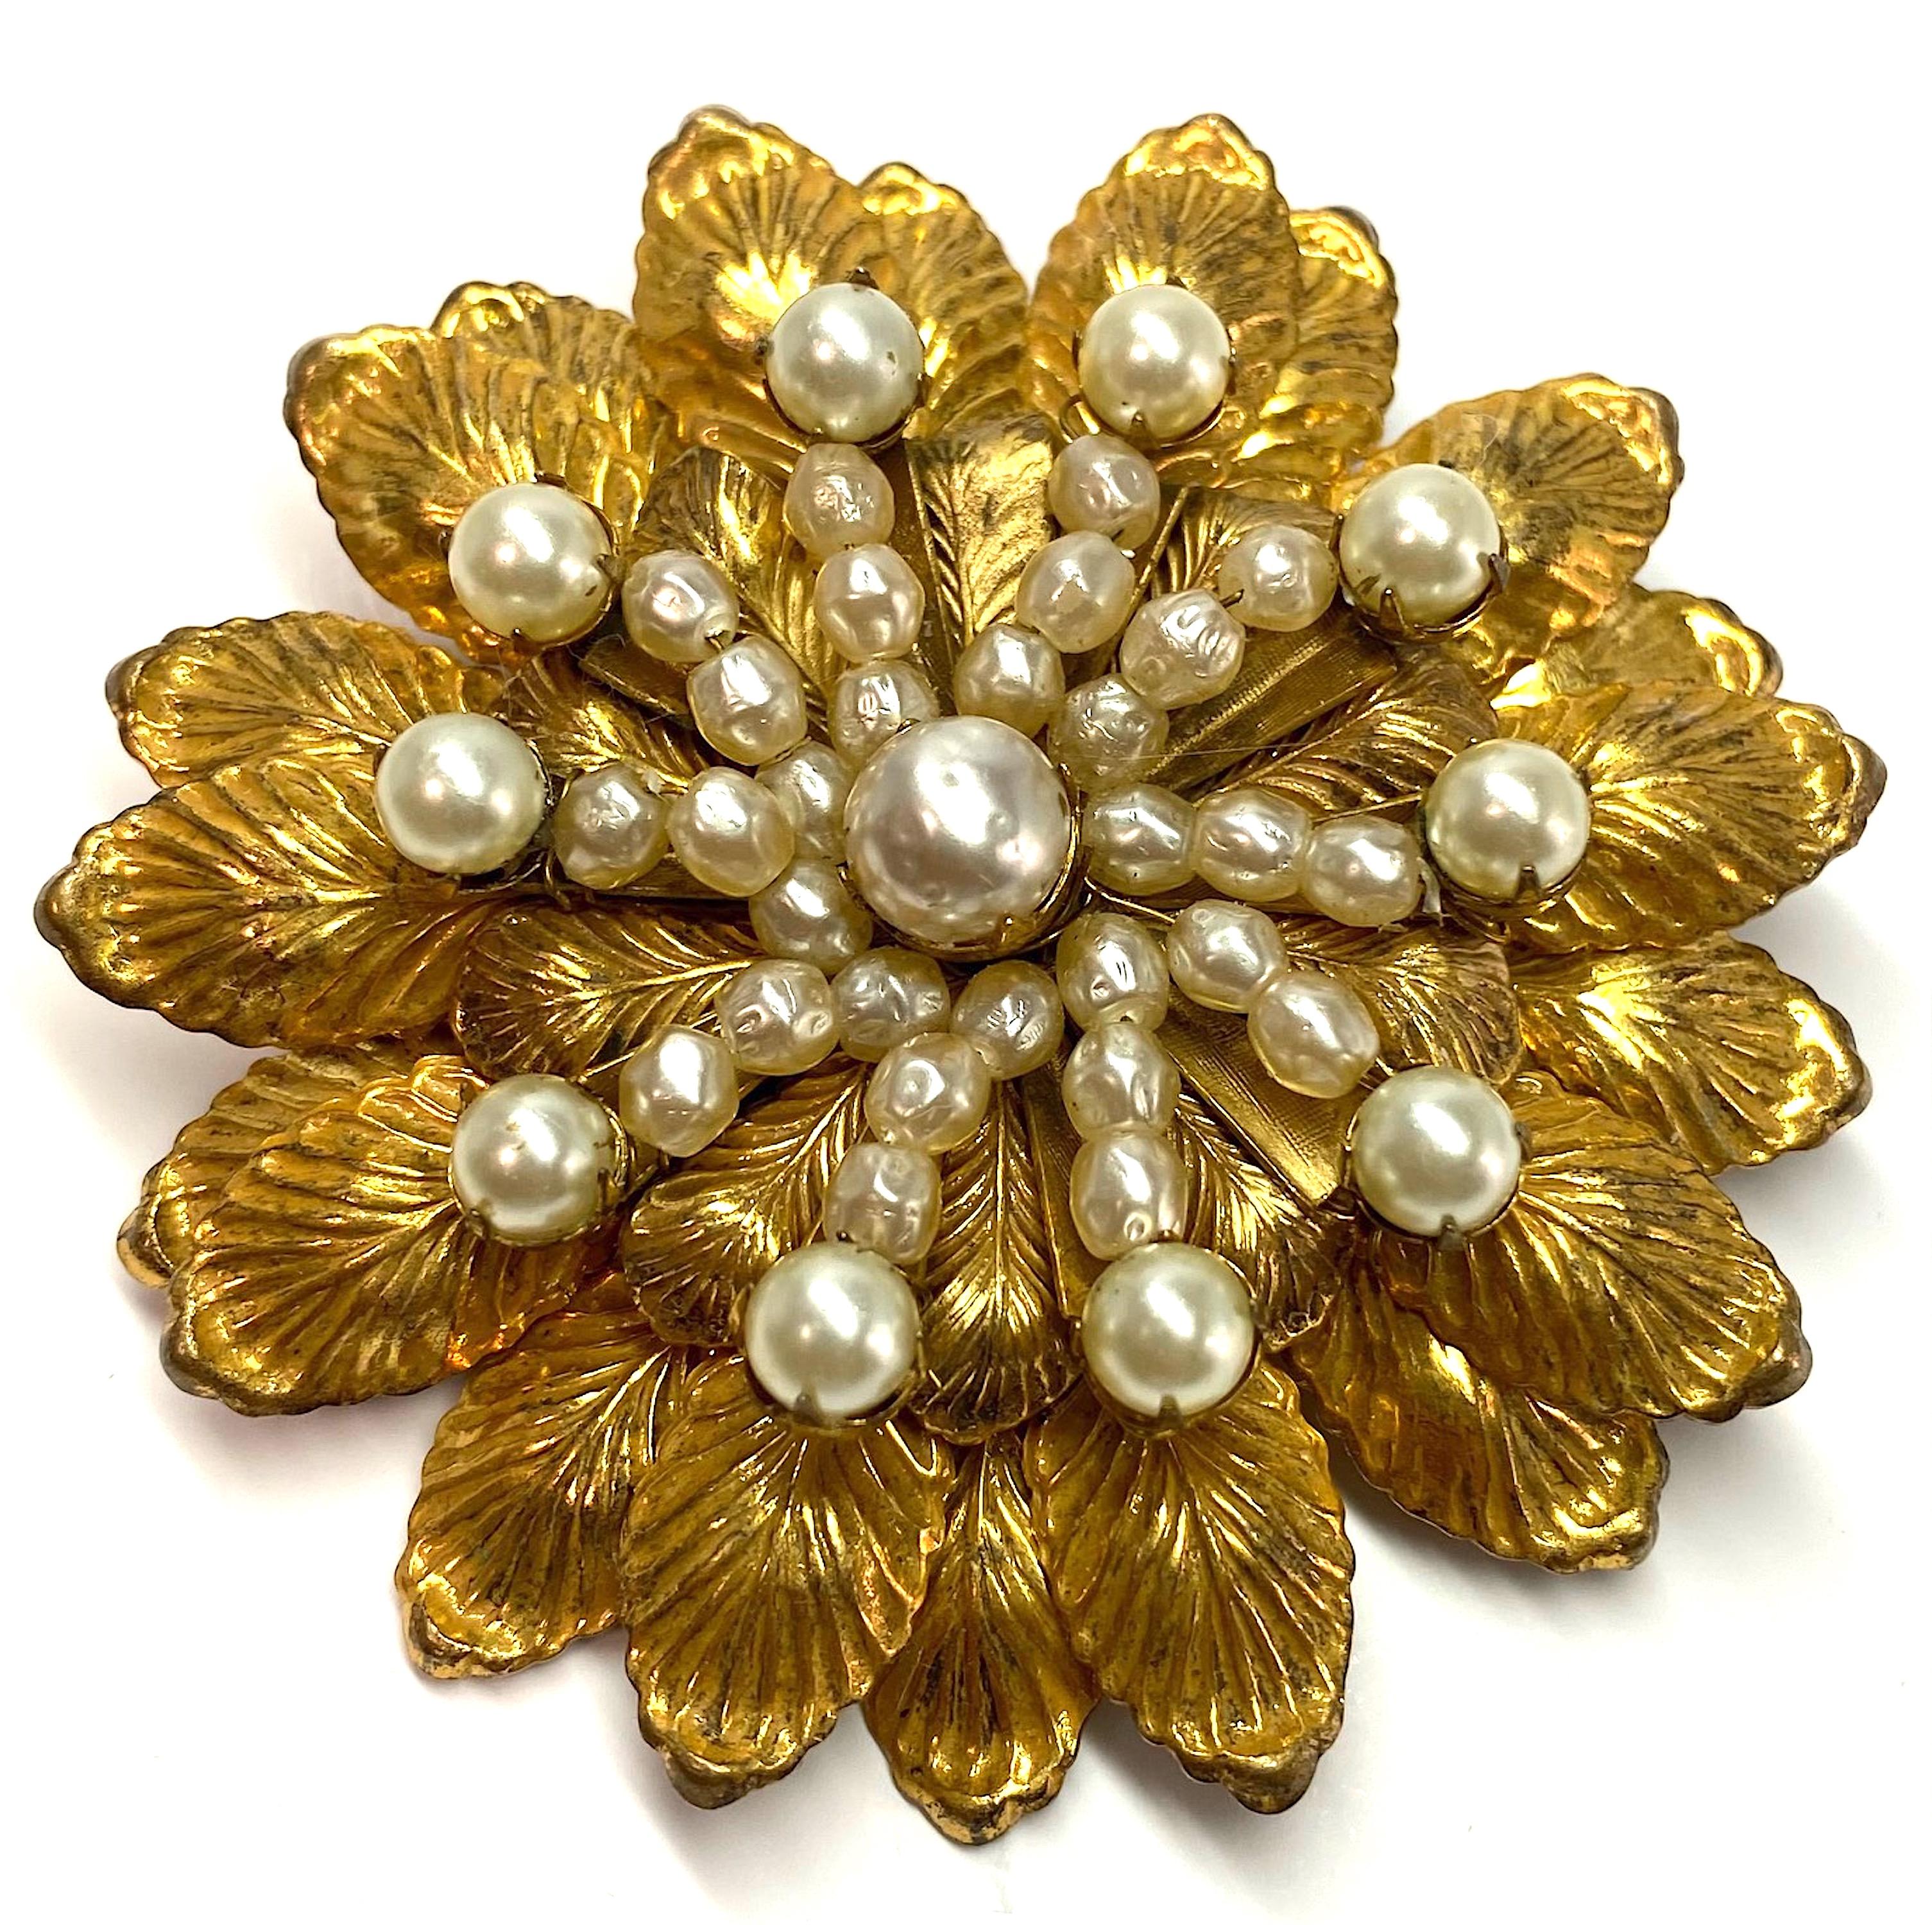 A beautiful and large there dimensional 1950s Miriam Haskell flower brooch. It is 2.75 inches in diameter. The brooch is  constructed in three stacked layers of floral disks. They are wired together as are the top Pearl accents. The back has a